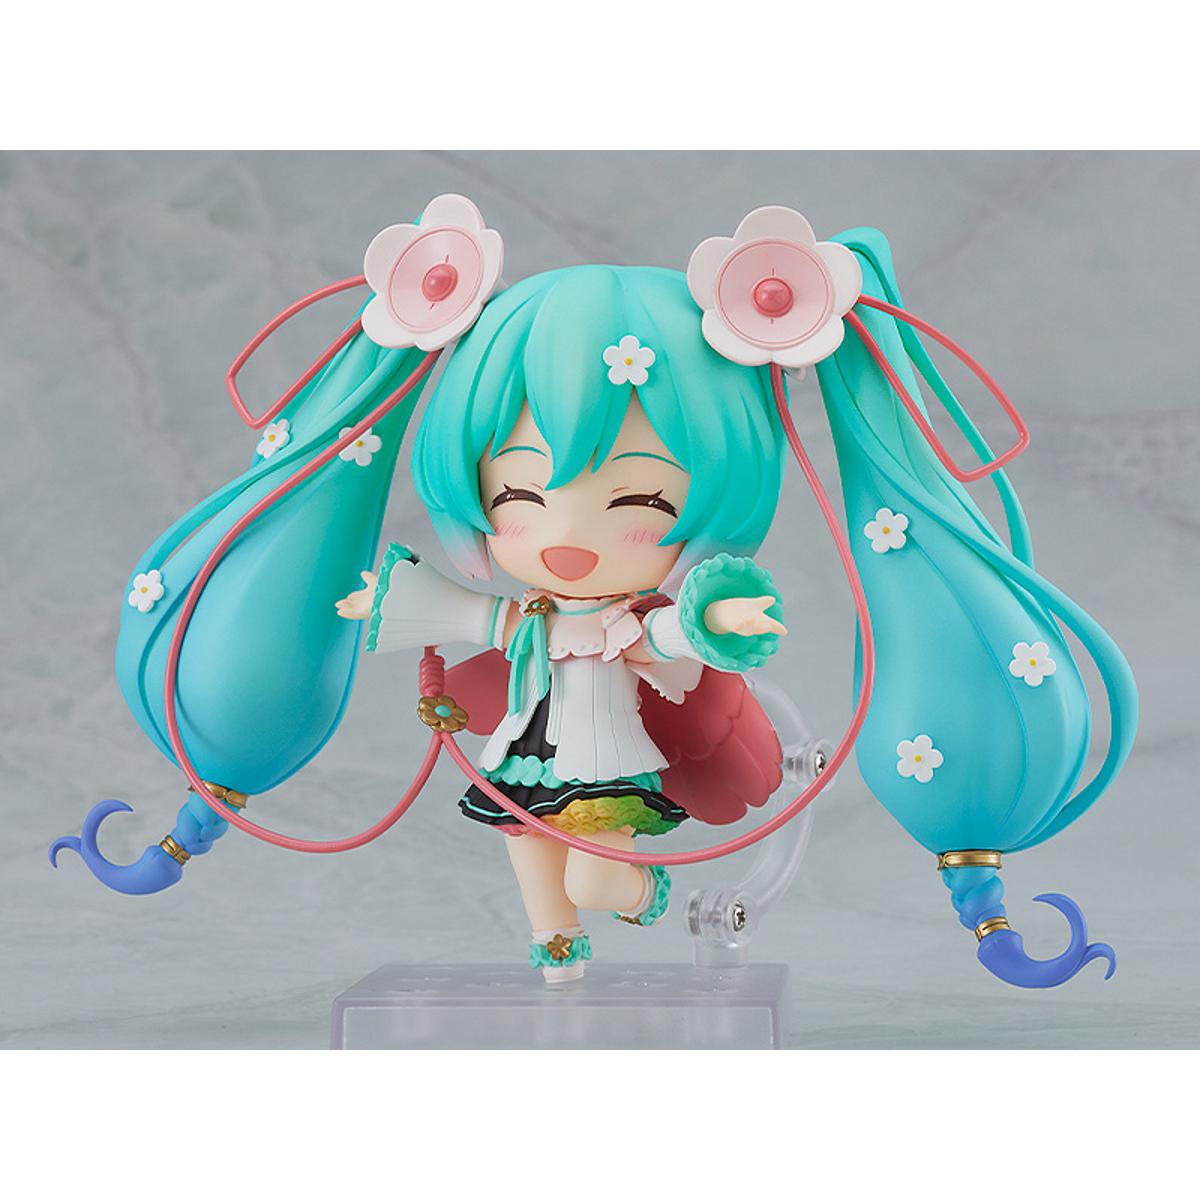 Good Smile Company Nendoroid Hatsune Miku Magical Mirai 2021 Ver. From "Character Vocal Series 01: Hatsune Miku" comes a Nendoroid of Hatsune Miku wearing her outfit from the Magical Mirai 2021 main visual illustration! Illustrator left's "Fairy Tale Fantasy" version of Miku has been brought to life. 